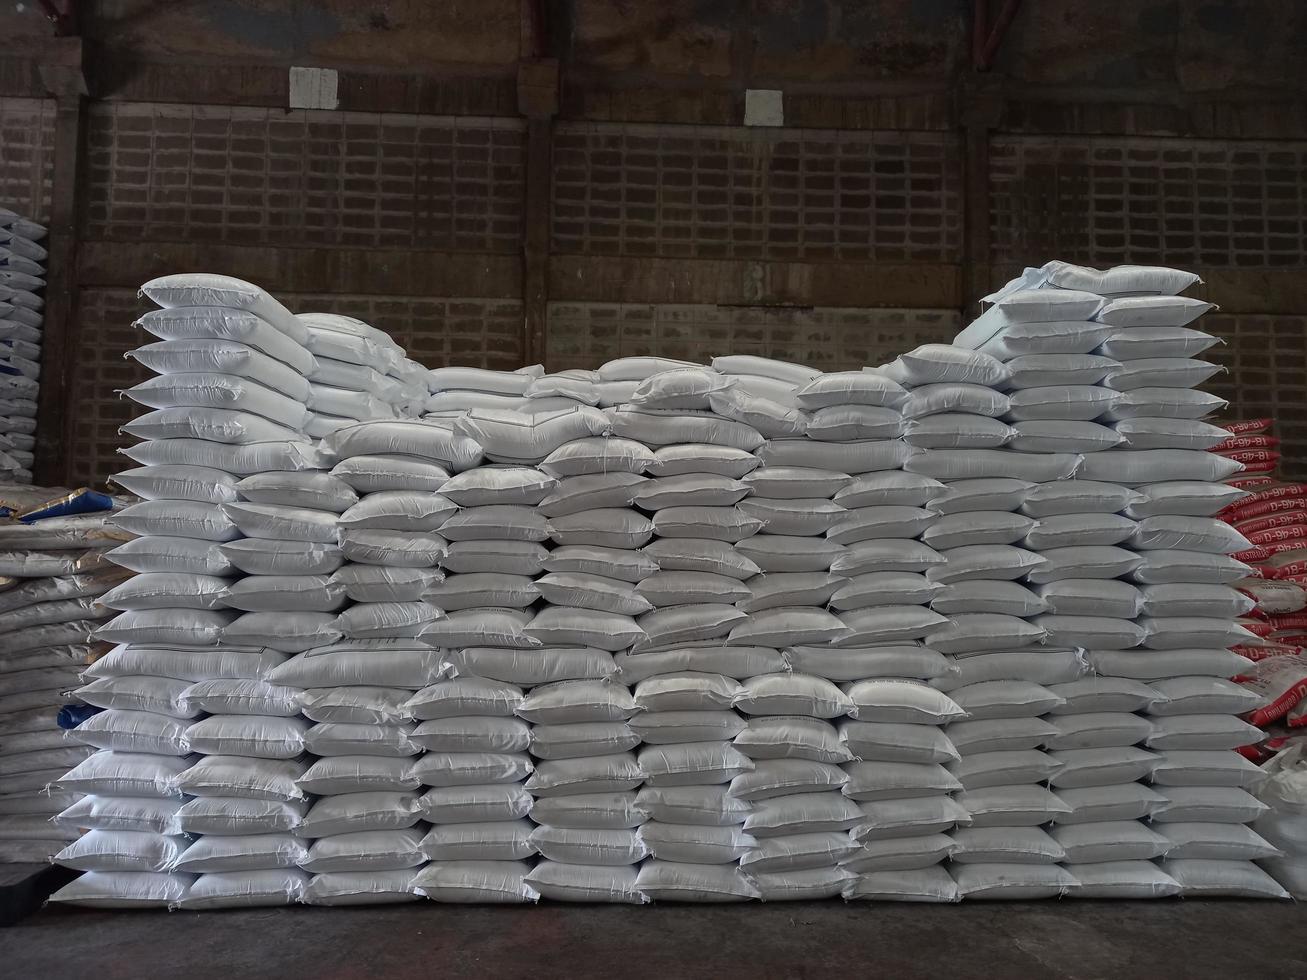 Chemical fertilizer The product stock is packed in sacks, stacked in the warehouse, waiting for delivery. photo